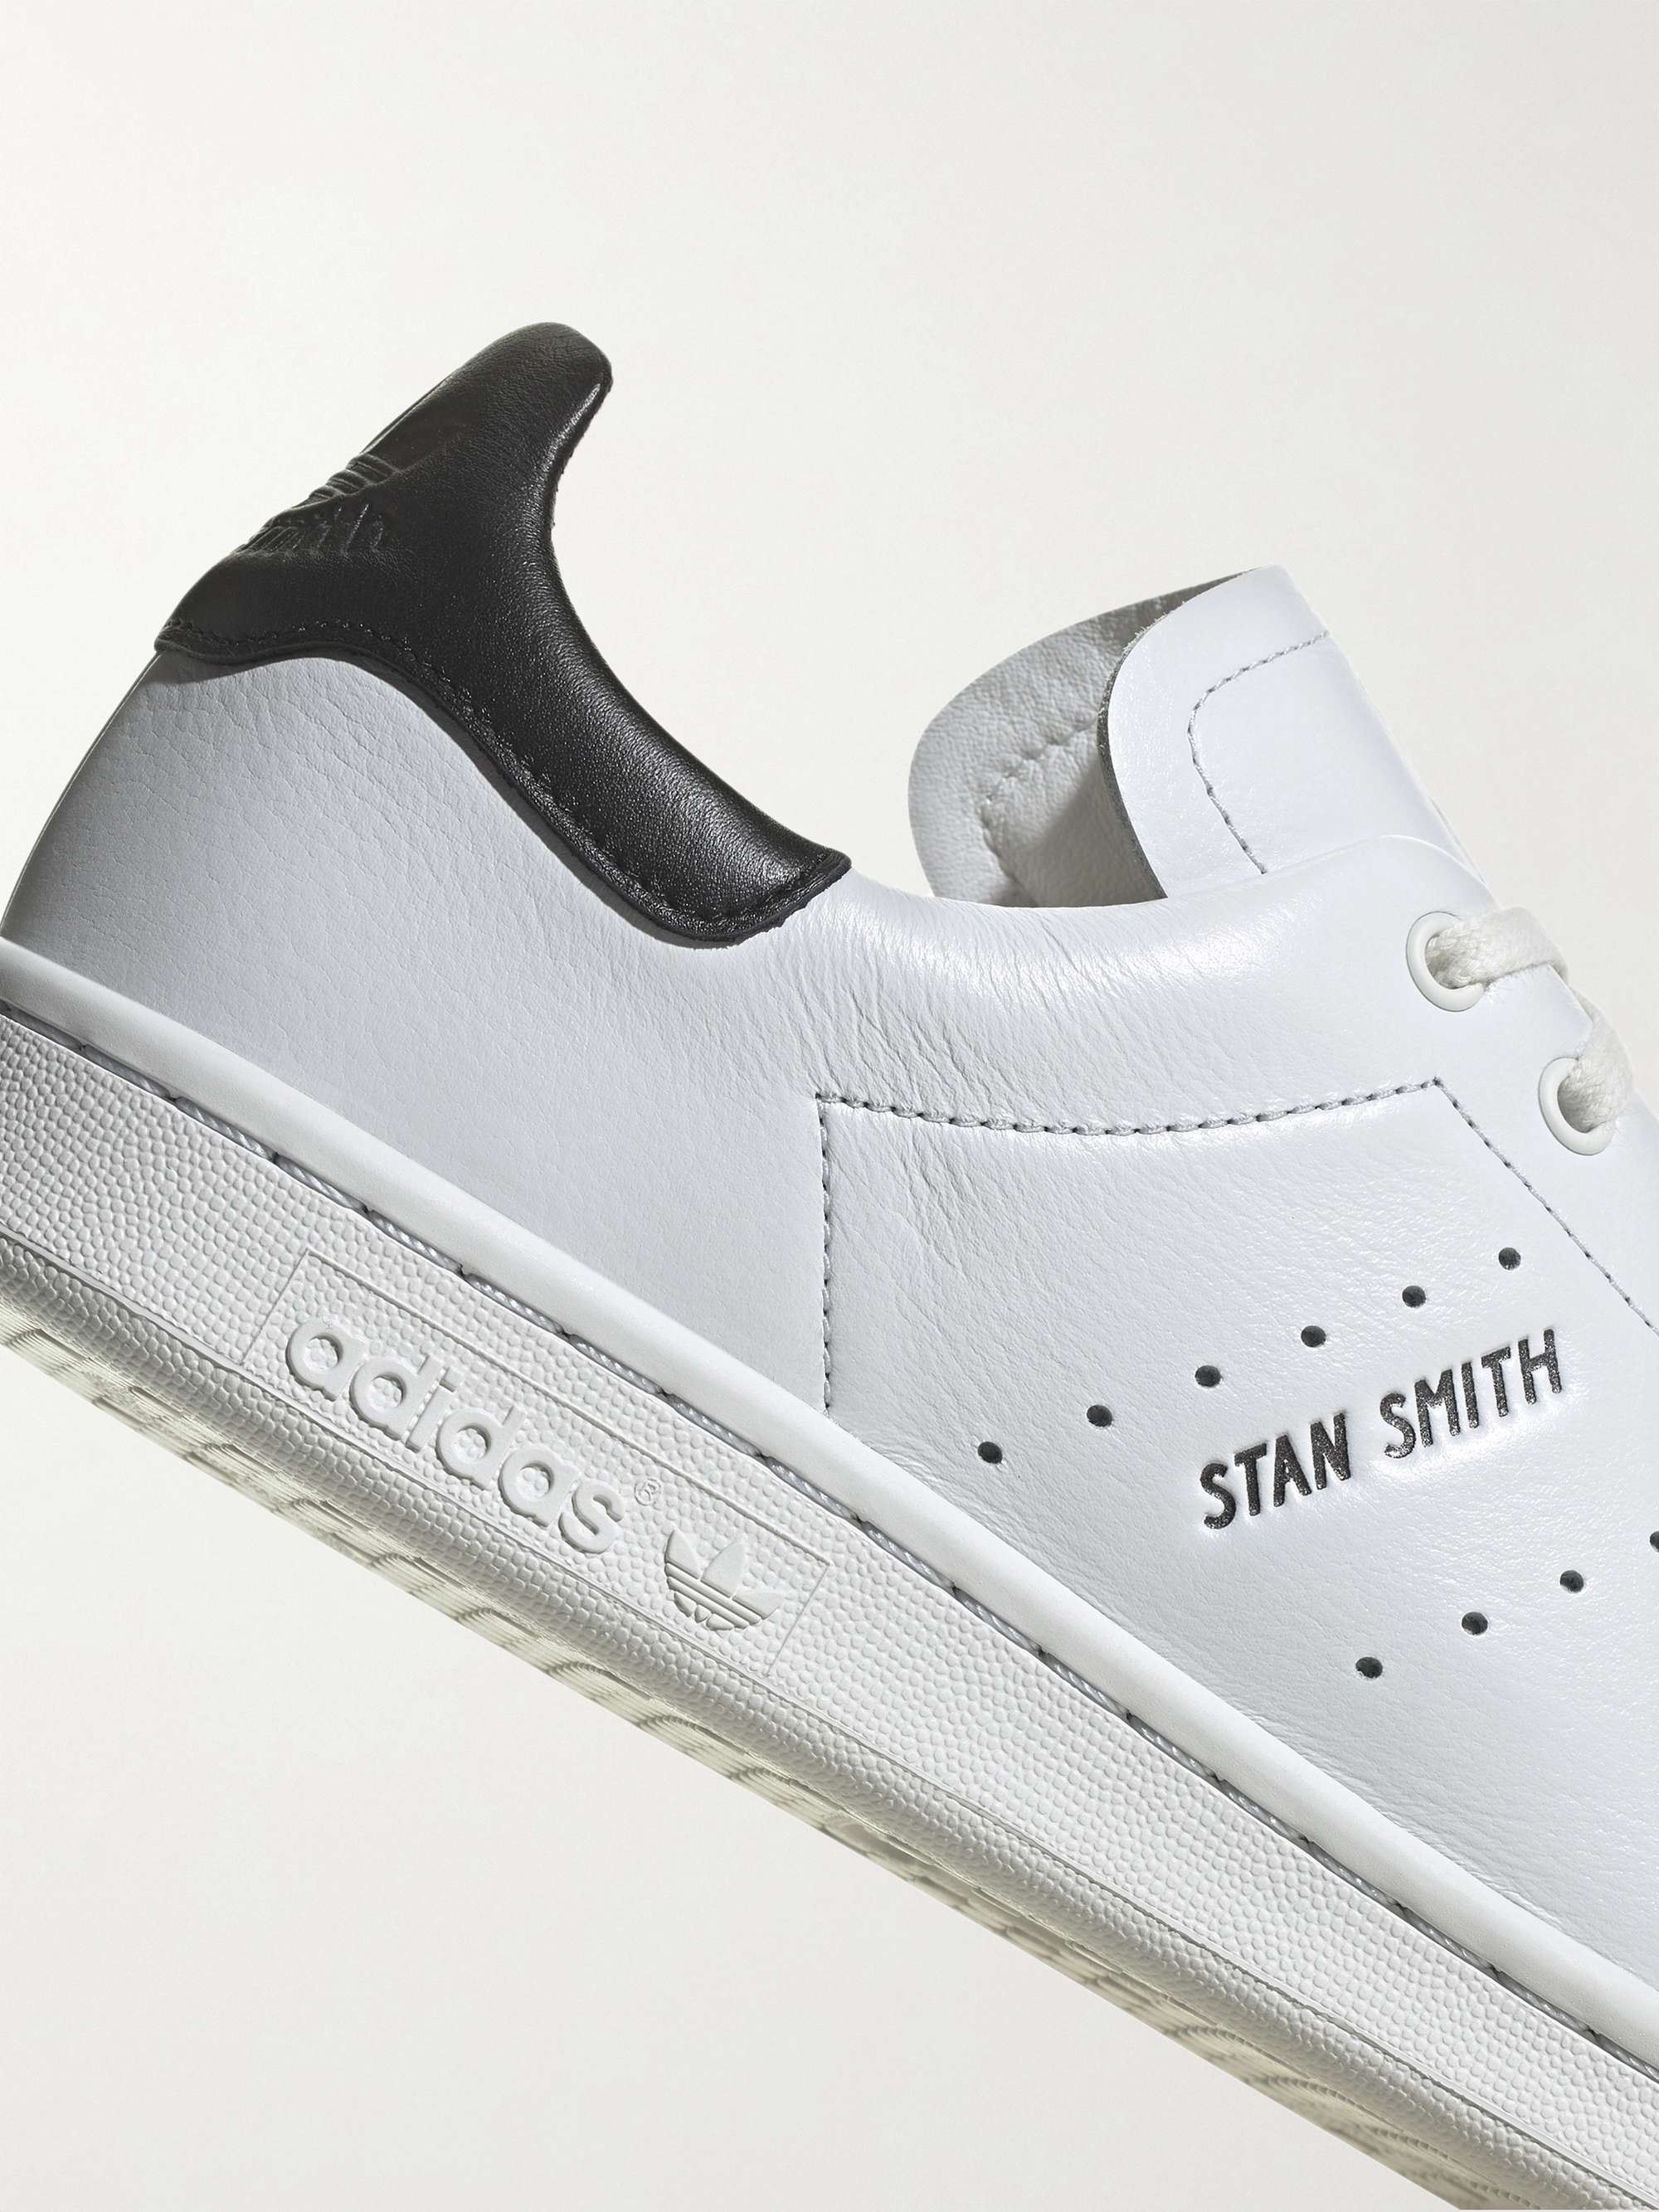 ADIDAS ORIGINALS Stan Smith Leather Sneakers | MR PORTER